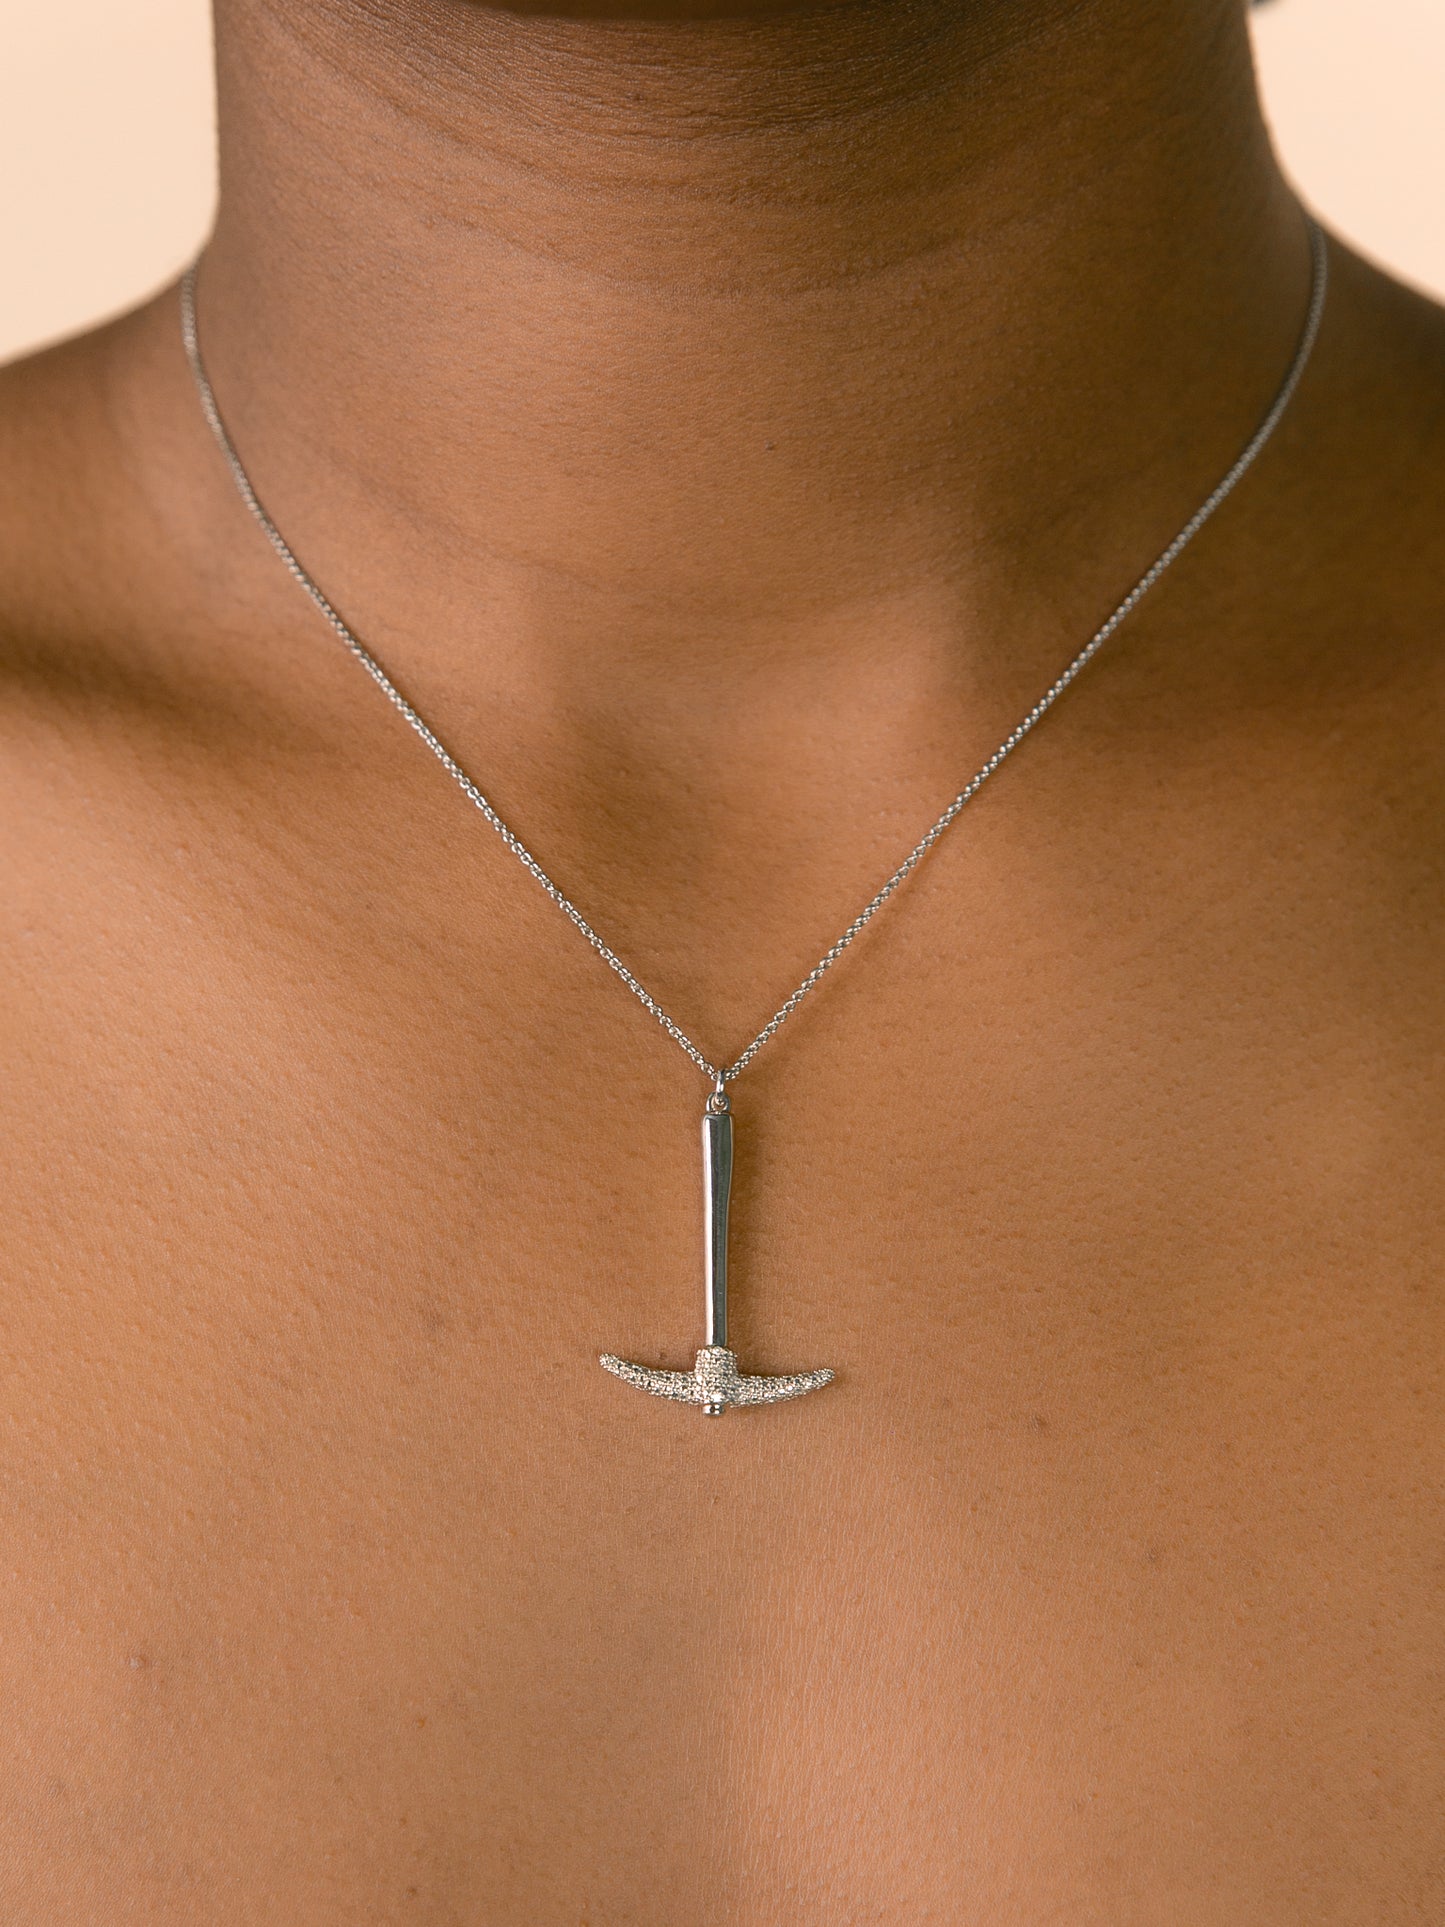 Pick Leadership Necklace